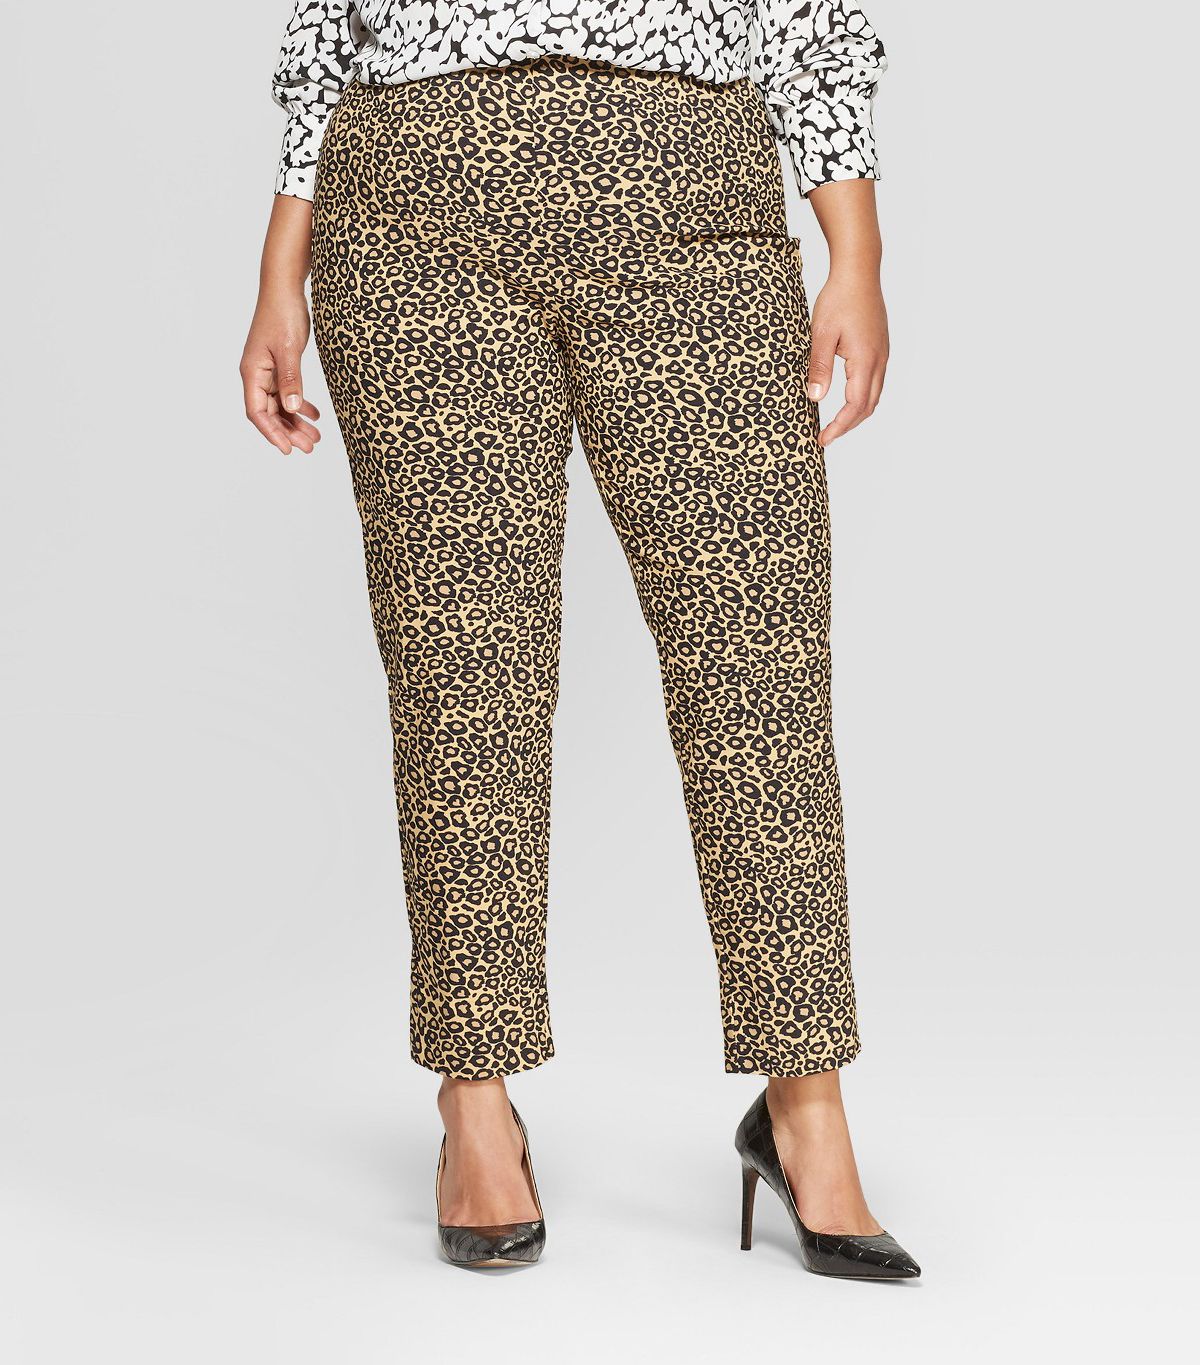 Shop Affordable Leopard-Print Clothes From Who What Wear | Who What Wear